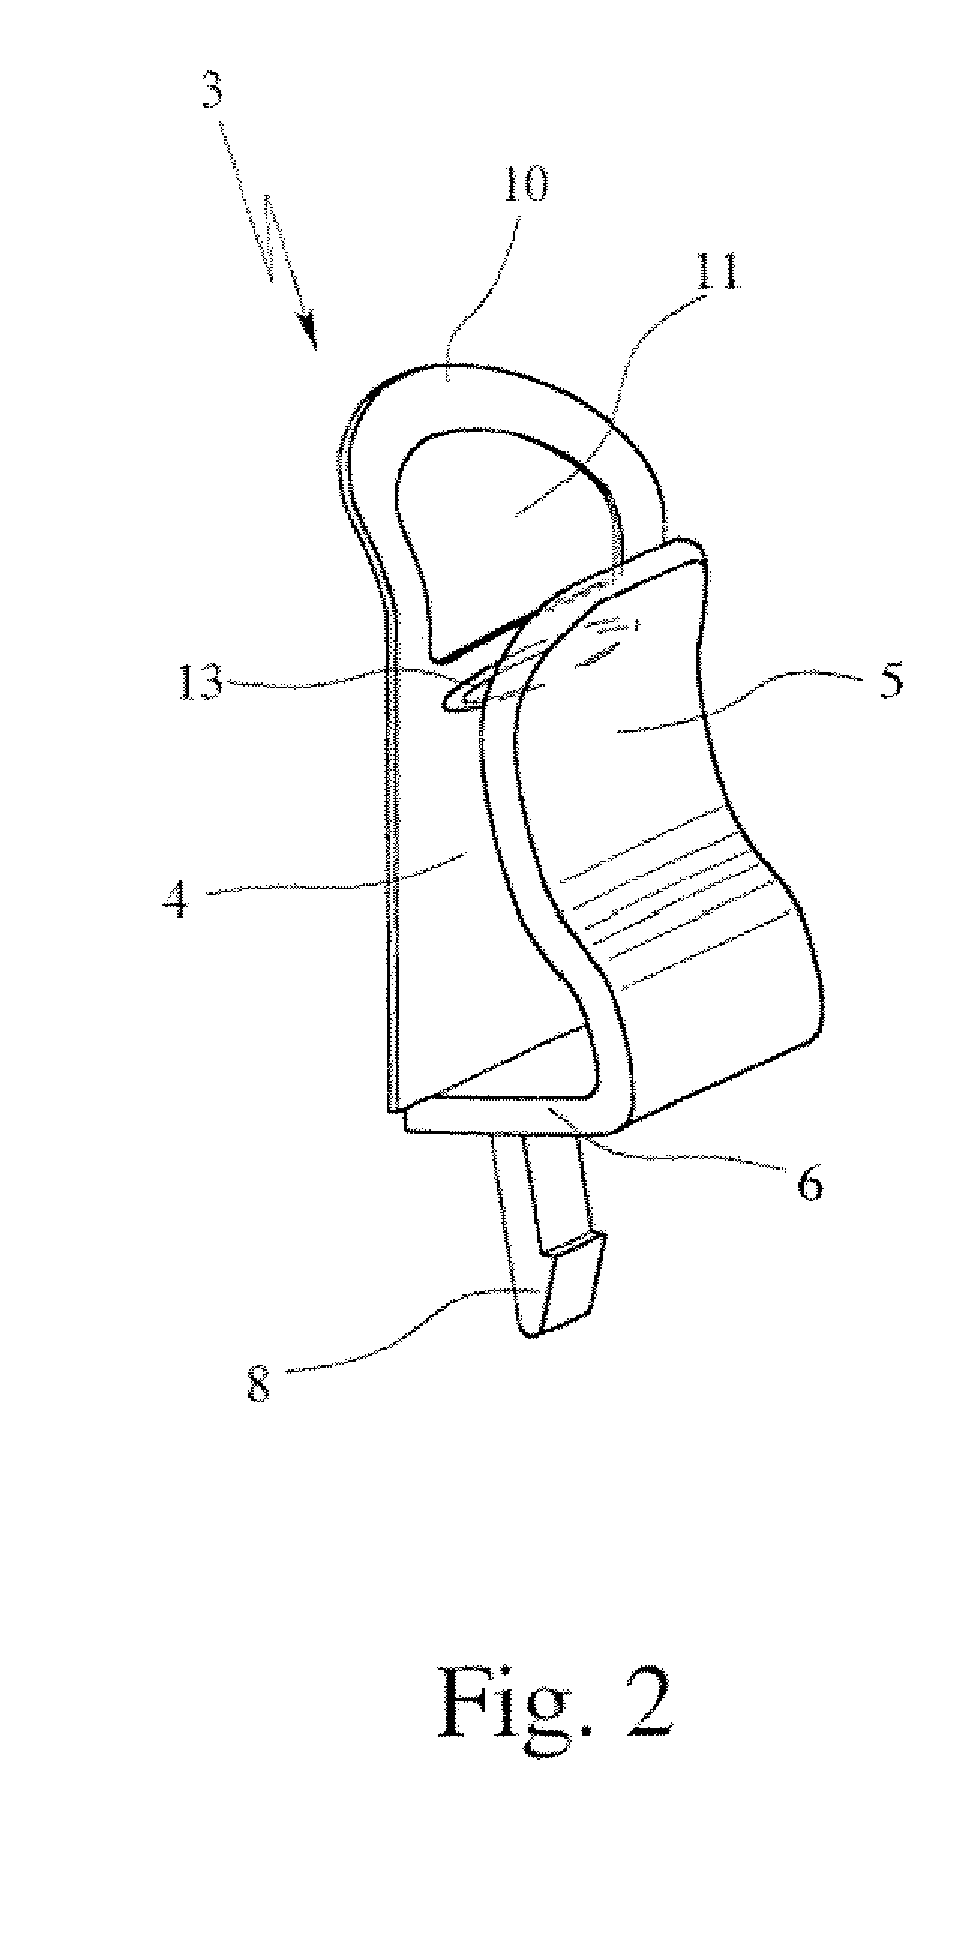 Fastening clip for releasably fastening a dispensing device for dispensing active substances into the flushing liquid on a downward pointing edge element of a toilet bowl, and dispensing device provided with a fastening clip of this type